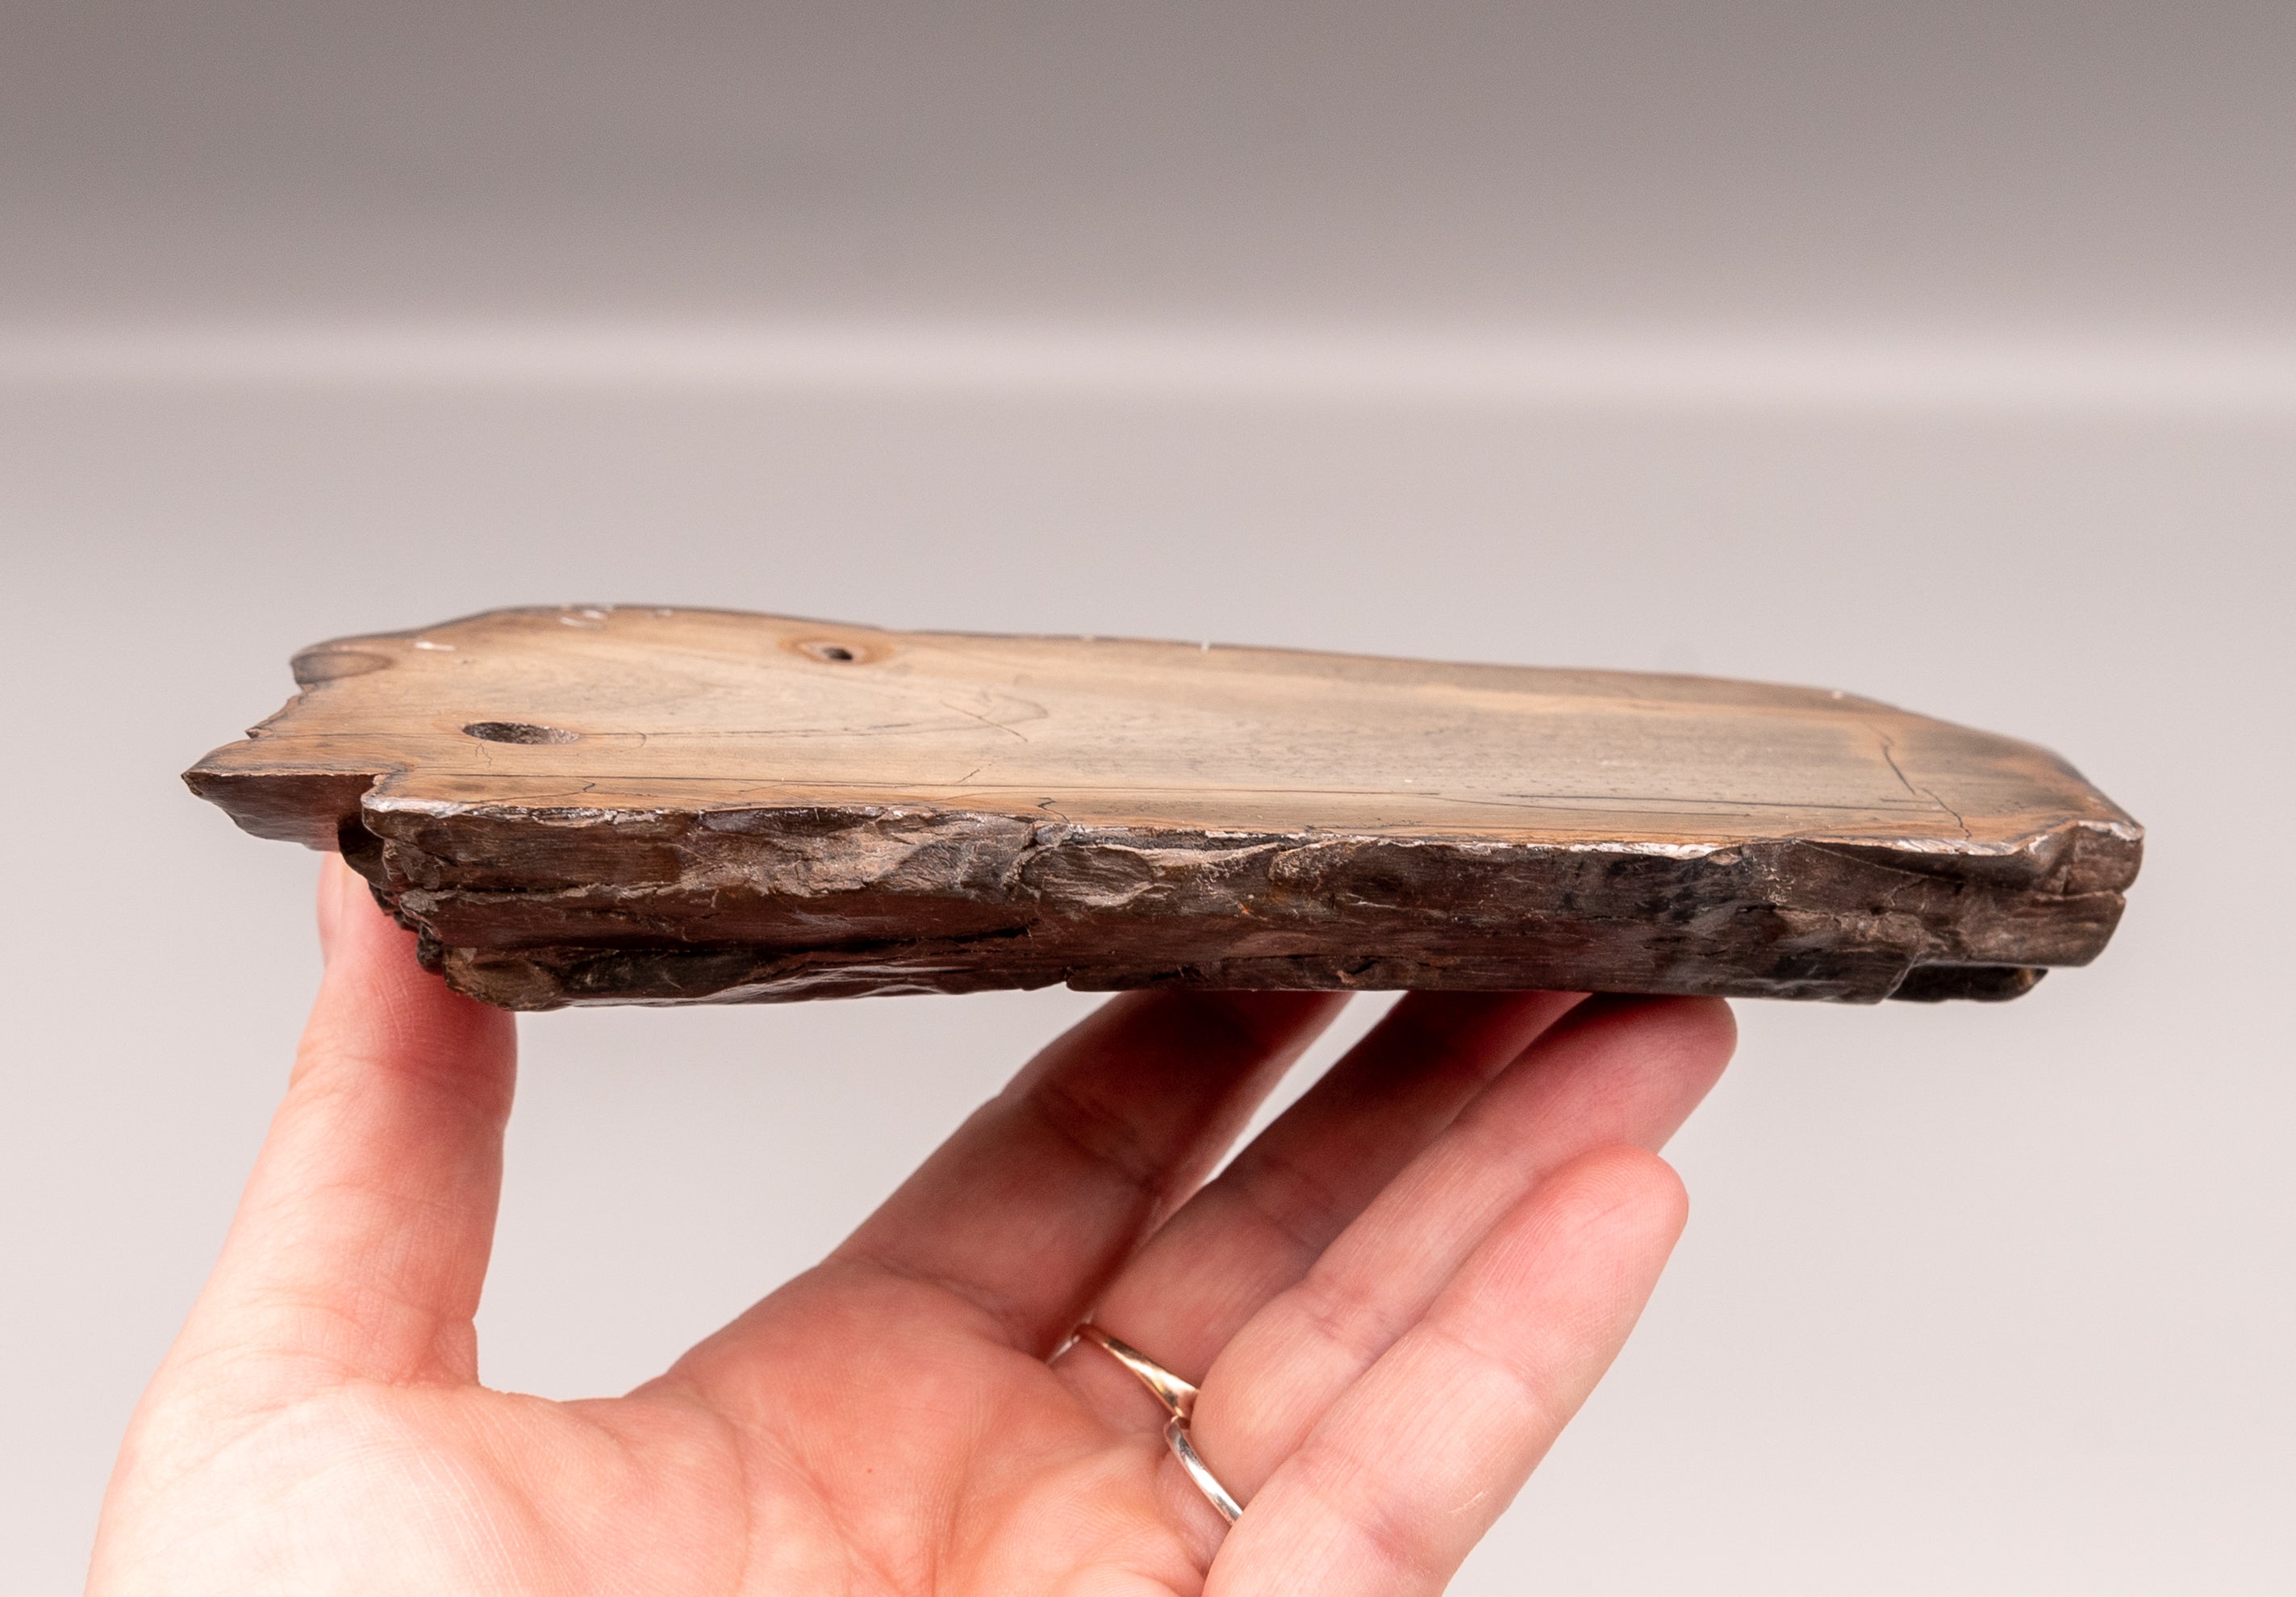 Section of Polished Mammoth Tusk